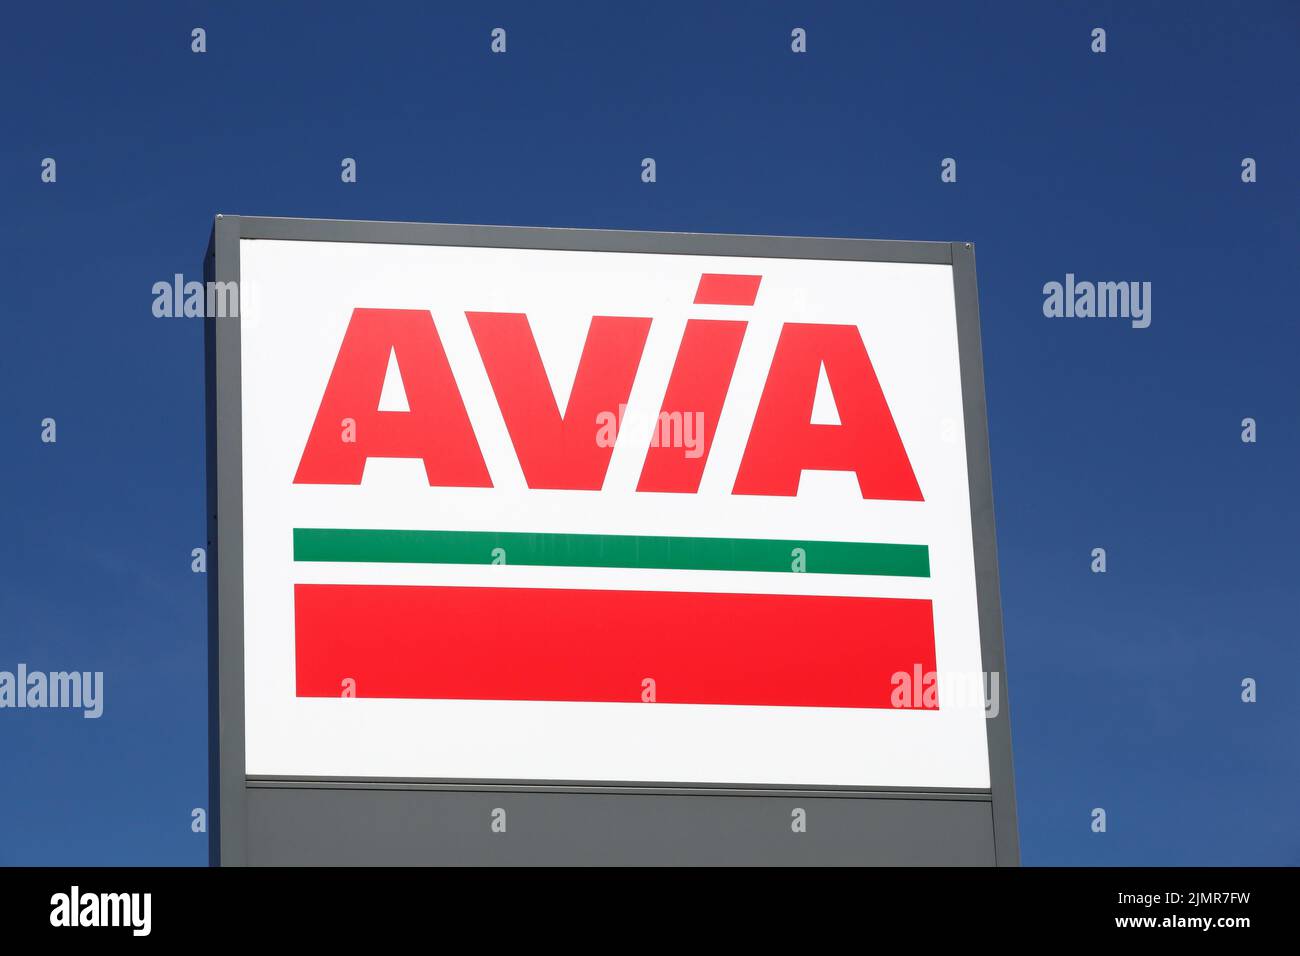 Chenelette, France - September 12, 2020: AVIA sign on a panel. AVIA International company is represented by more than 2900 petrol stations Stock Photo